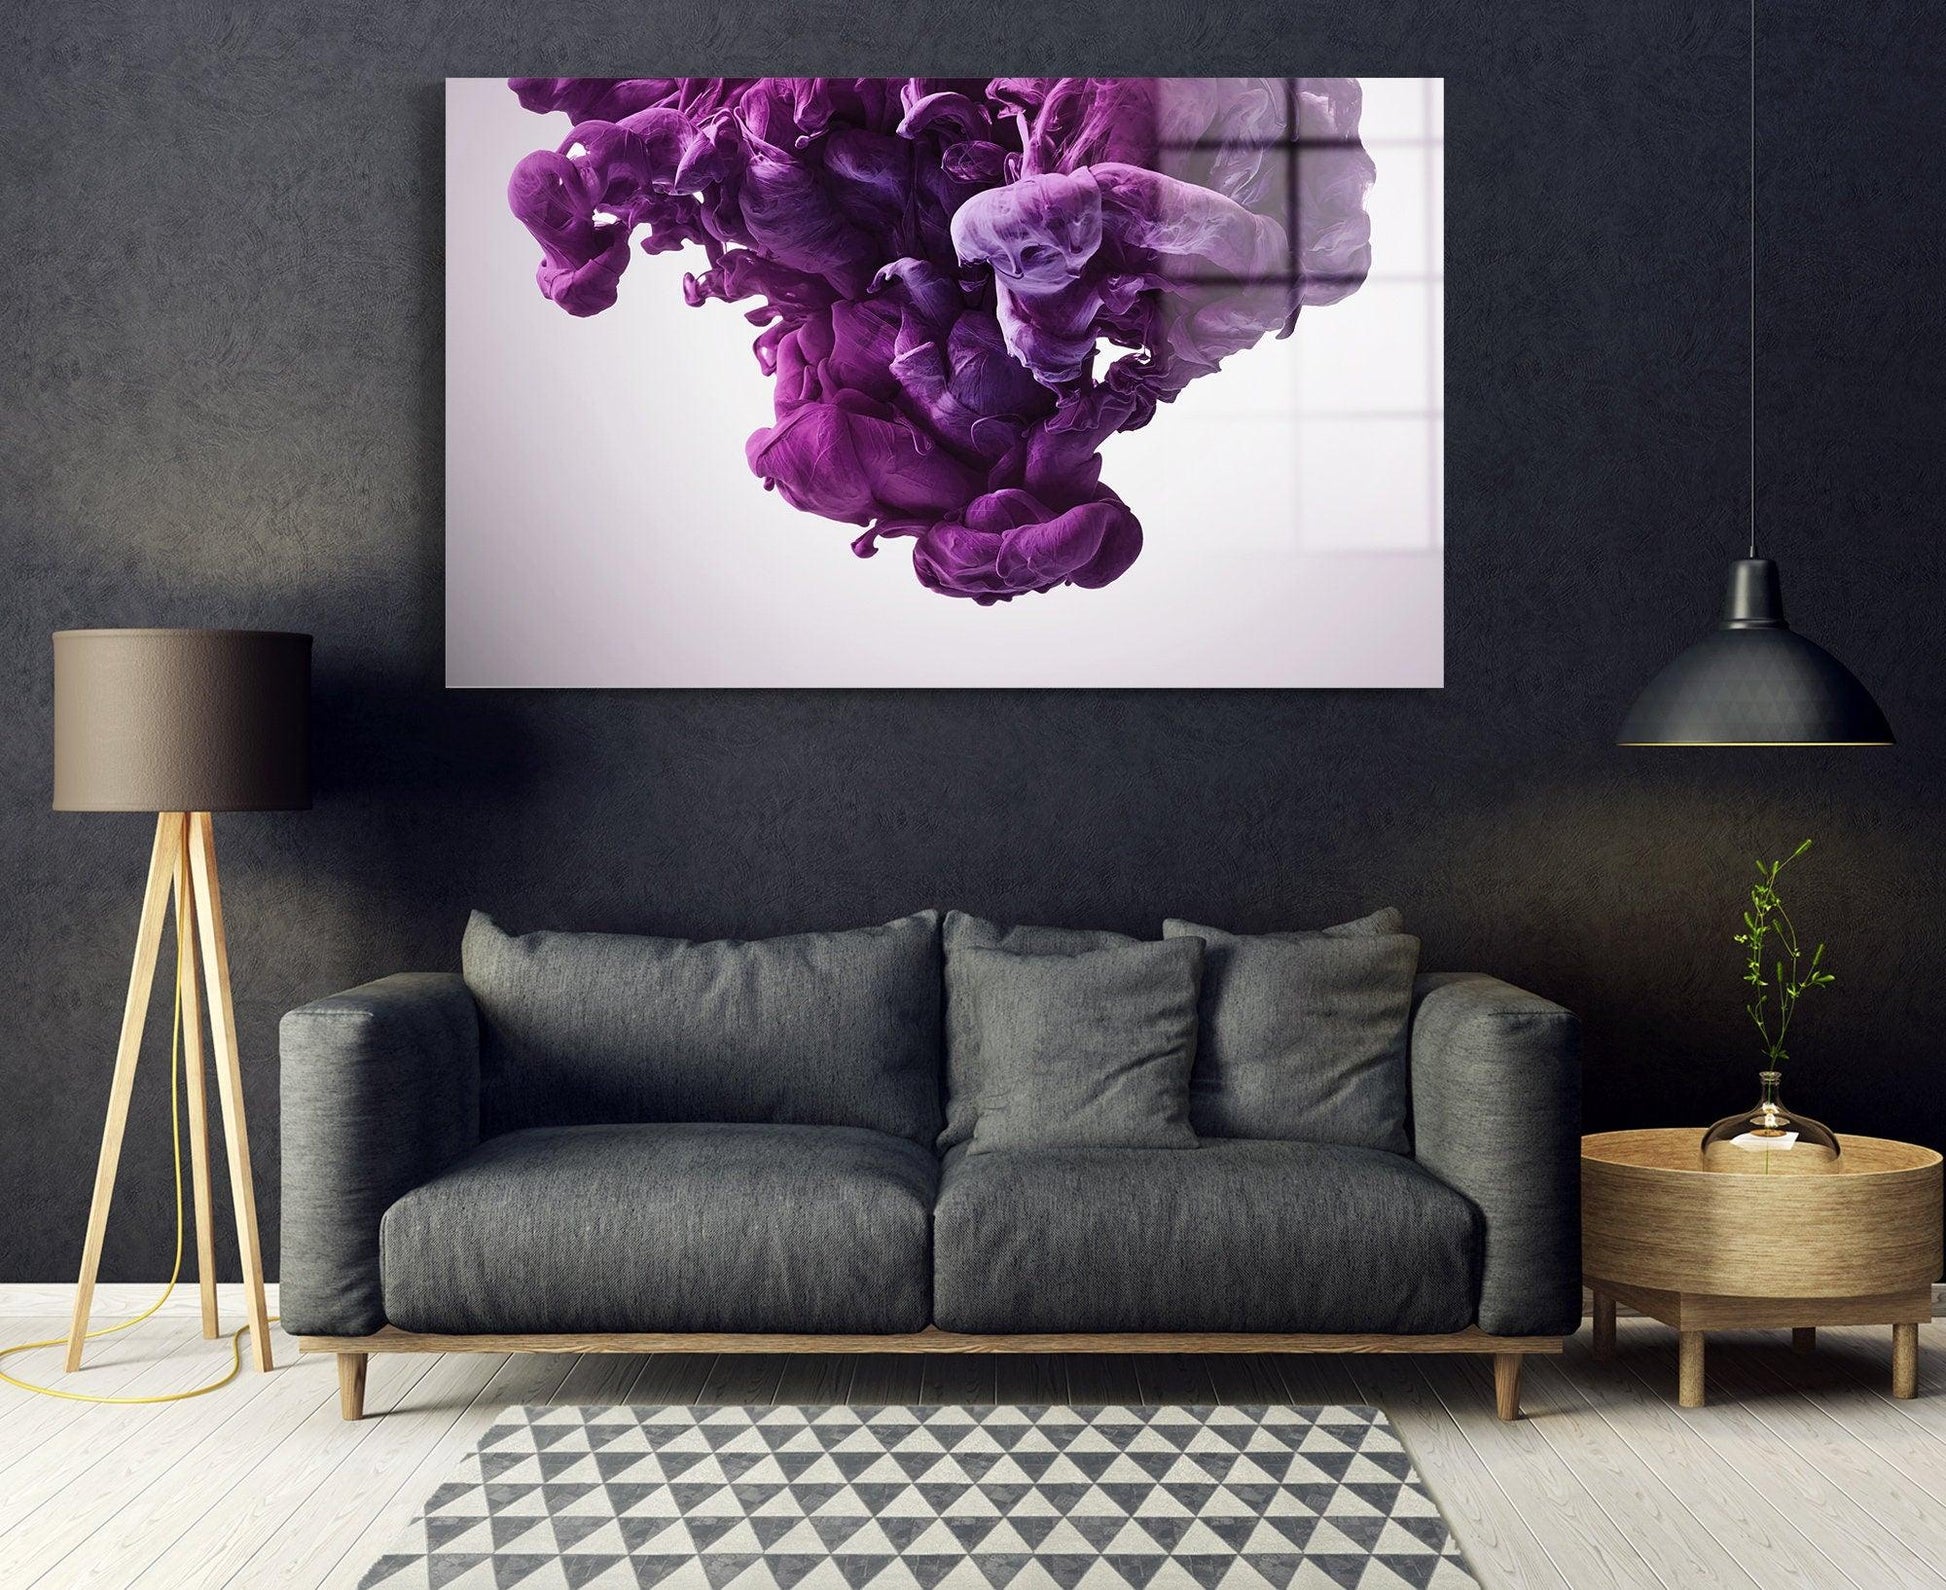 Purple Smoke Glass Printing Wall Art| Modern Decor Ideas For Your House And Office Natural And Vivid Home Wall Decor Housewarming Gift - TrendiArt